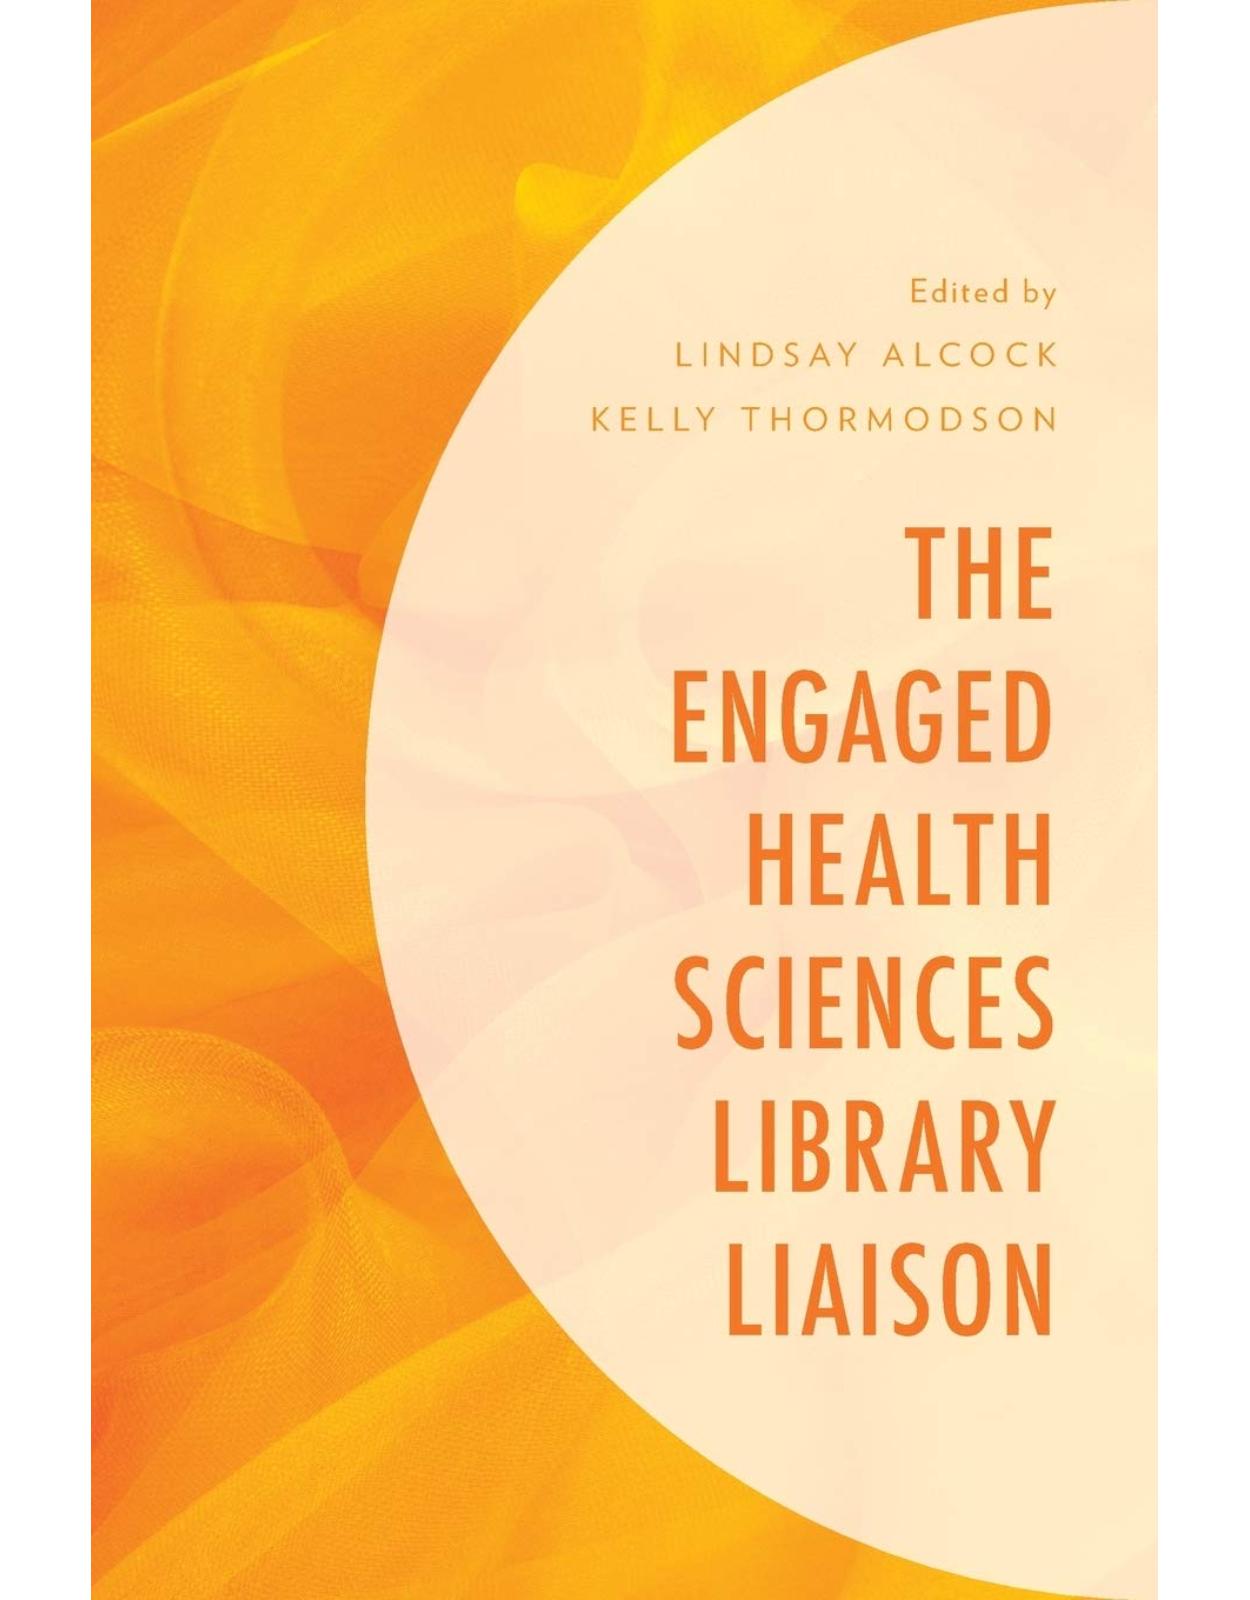 The Engaged Health Sciences Library Liaison 